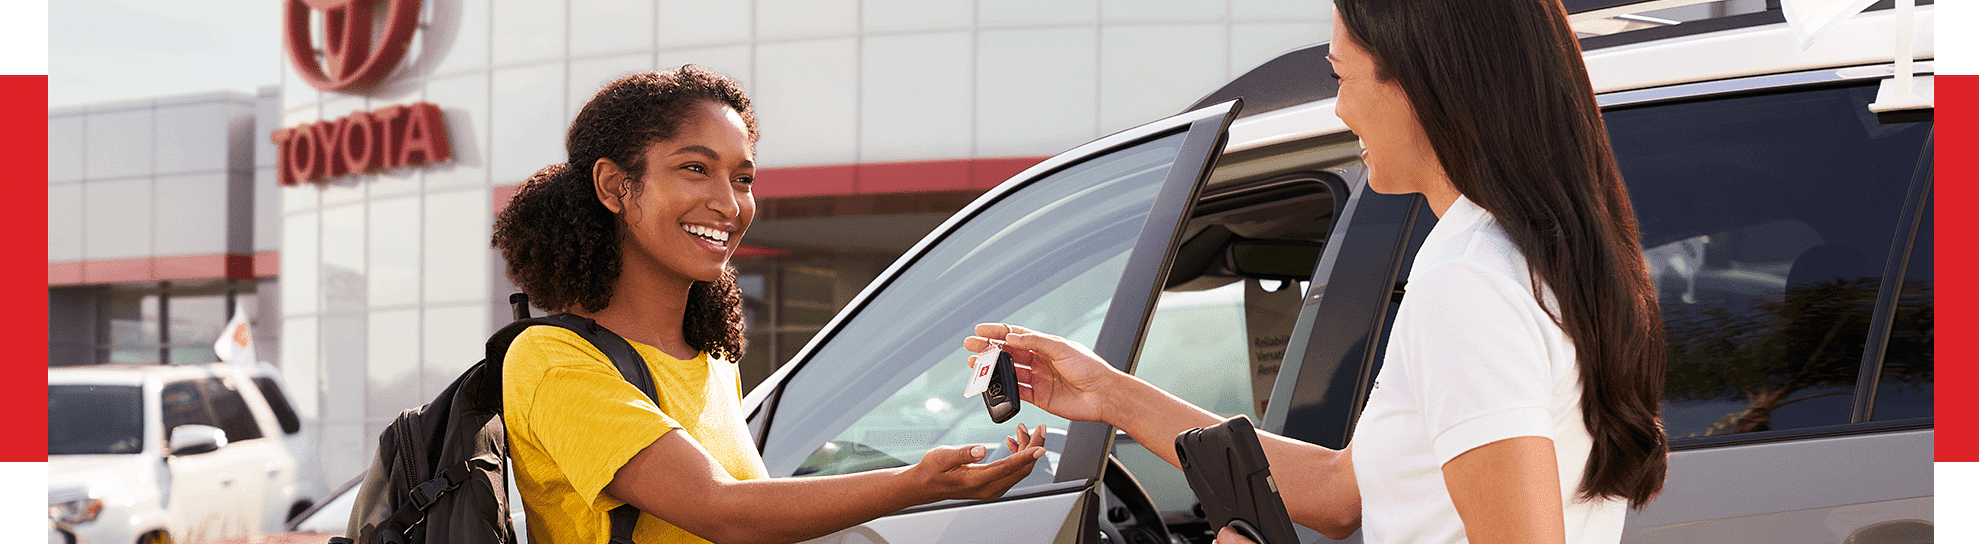 A woman handing car keys to another woman in front of a Toyota dealership